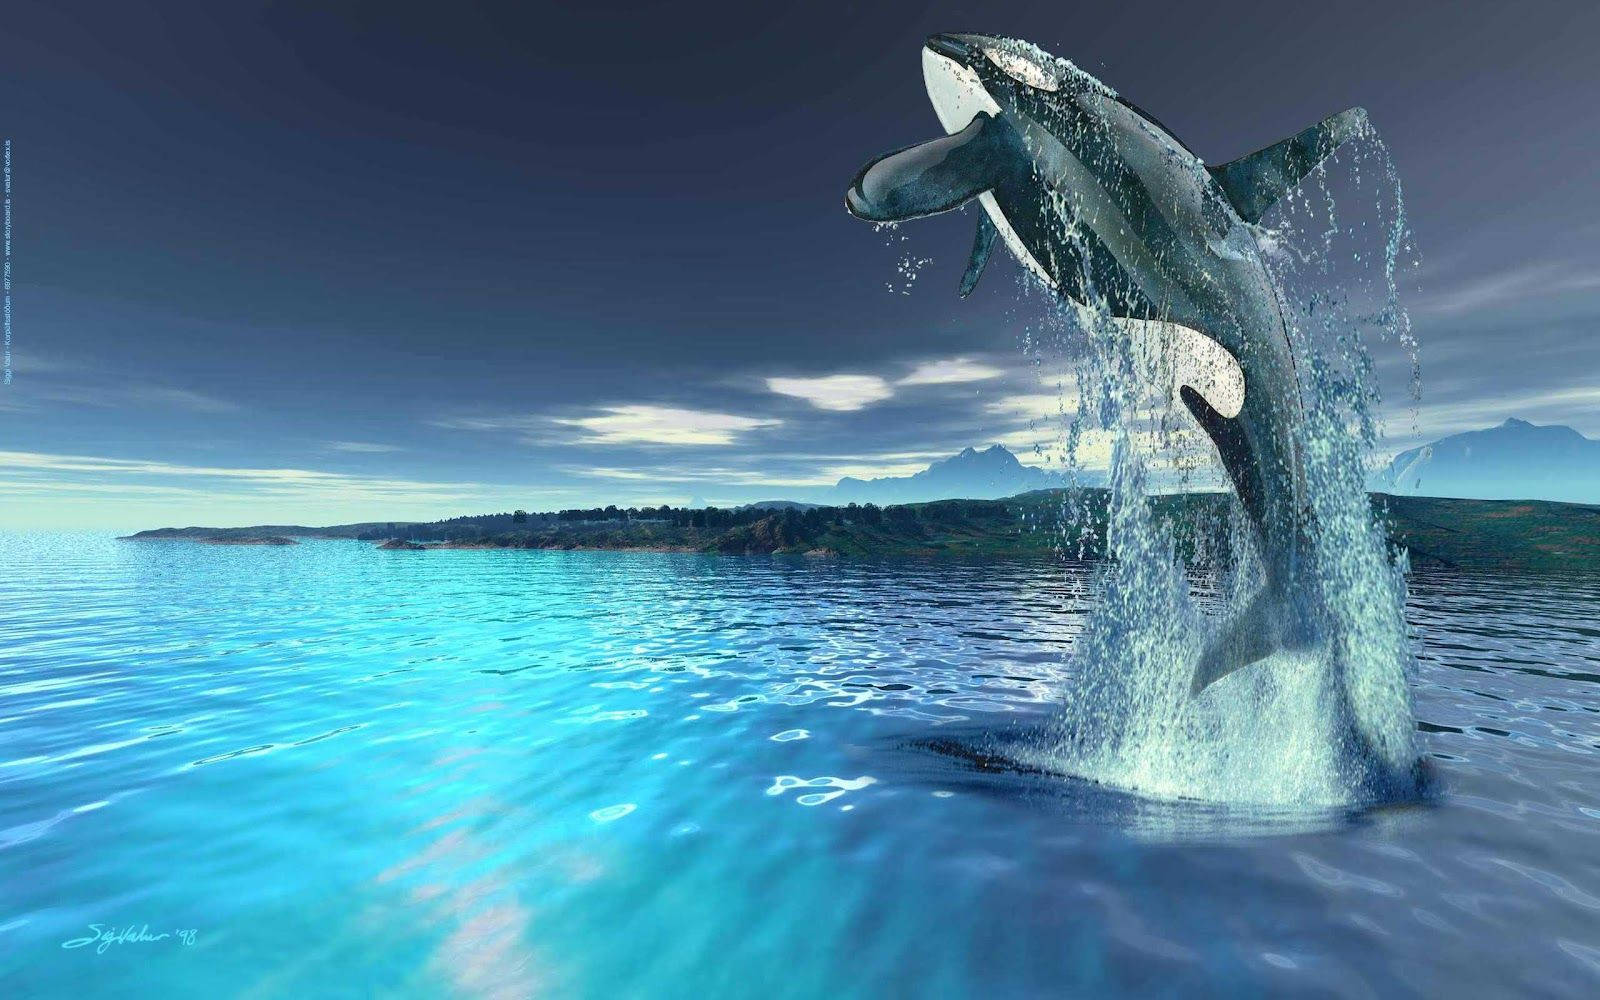 Caption: Breathtaking Snapshot Of A Majestic Whale In The Deep Blue Ocean Wallpaper